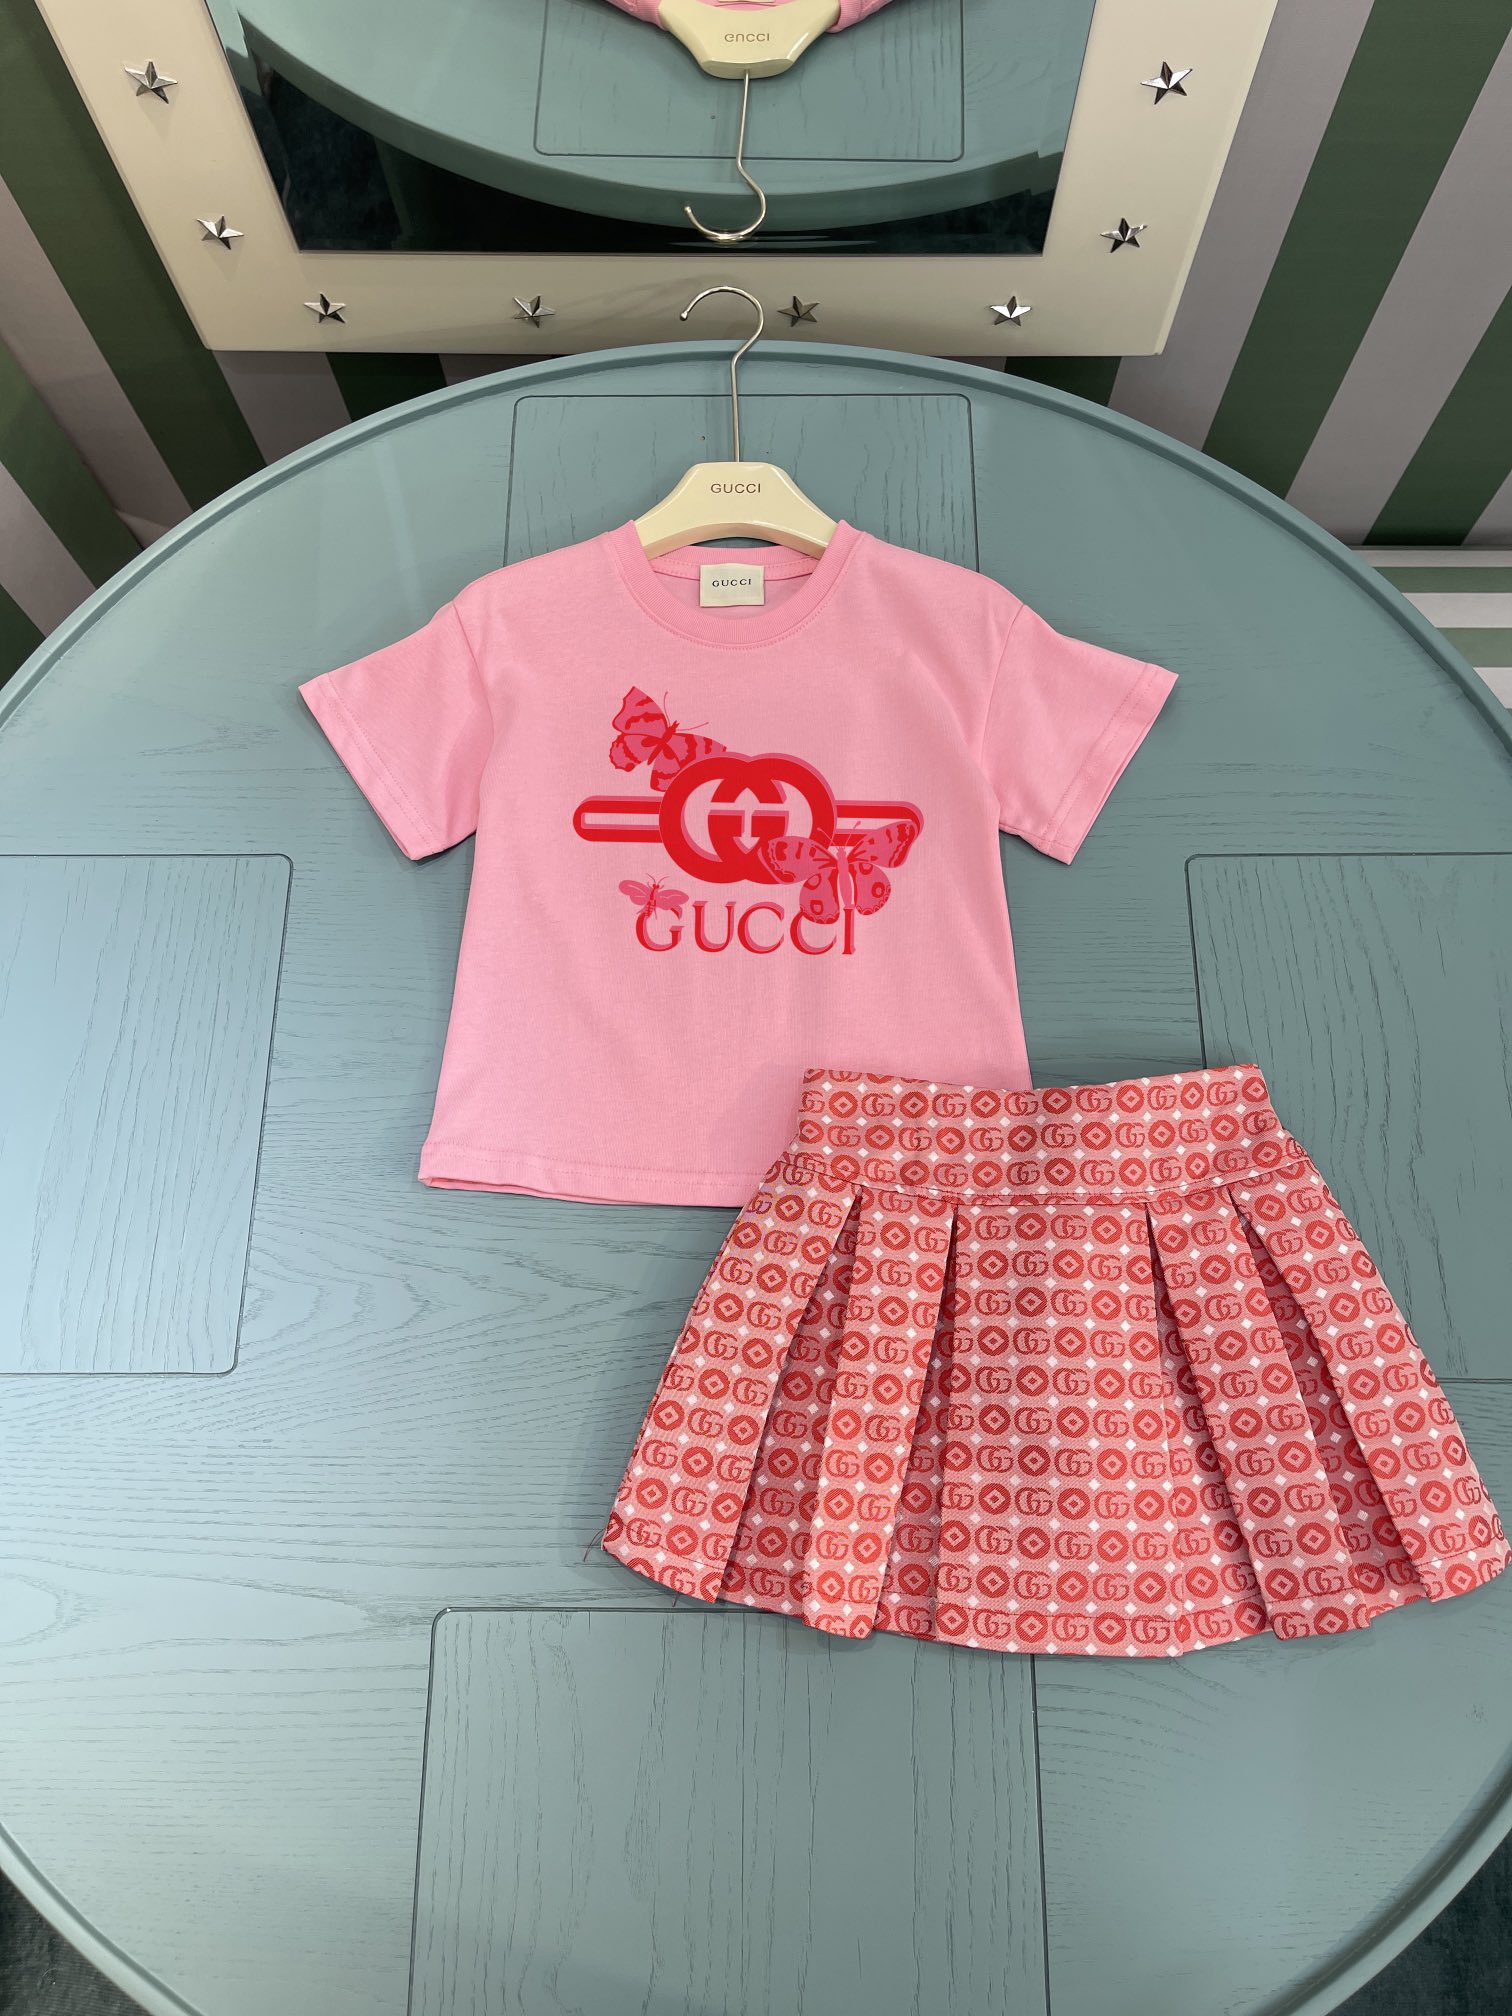 Gucci Clothing T-Shirt Top Sale
 Pink White Printing Cotton Summer Collection Vintage Short Sleeve